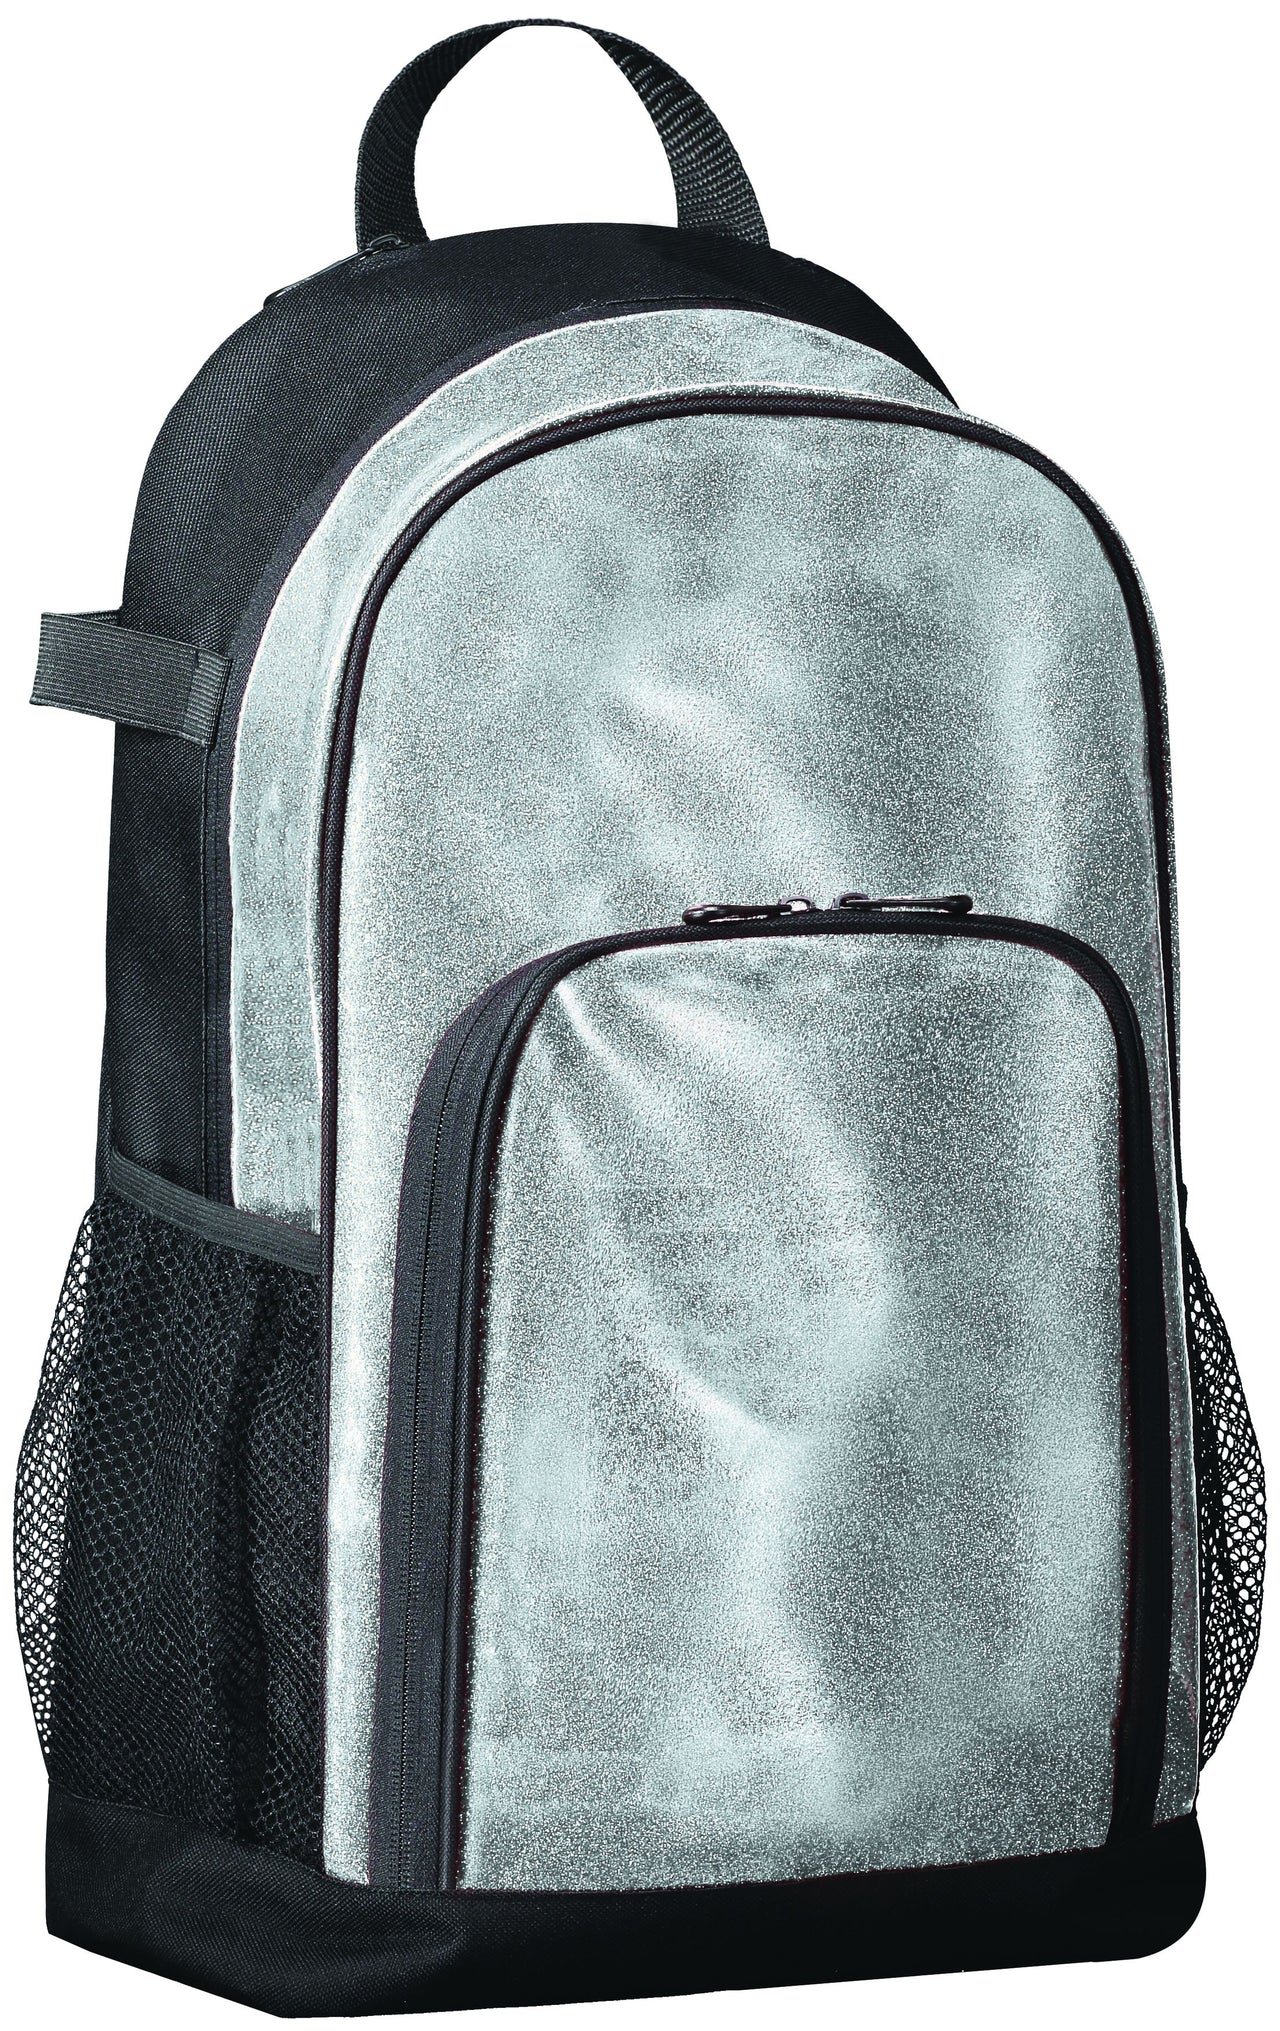 All Out Glitter Backpack - 1106